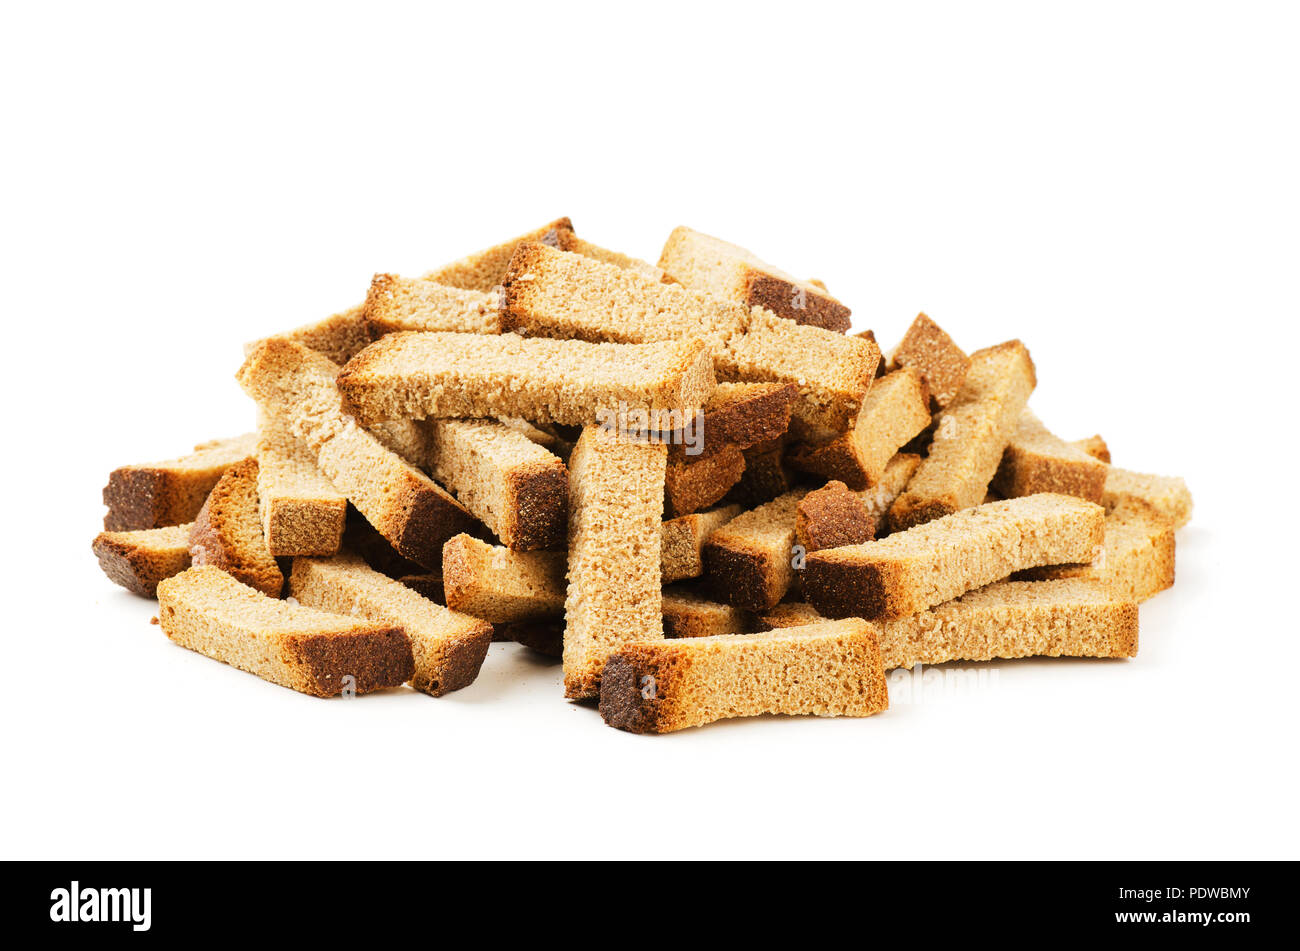 Crumbs of rye bread croutons or zwieback isolated on white background Stock Photo